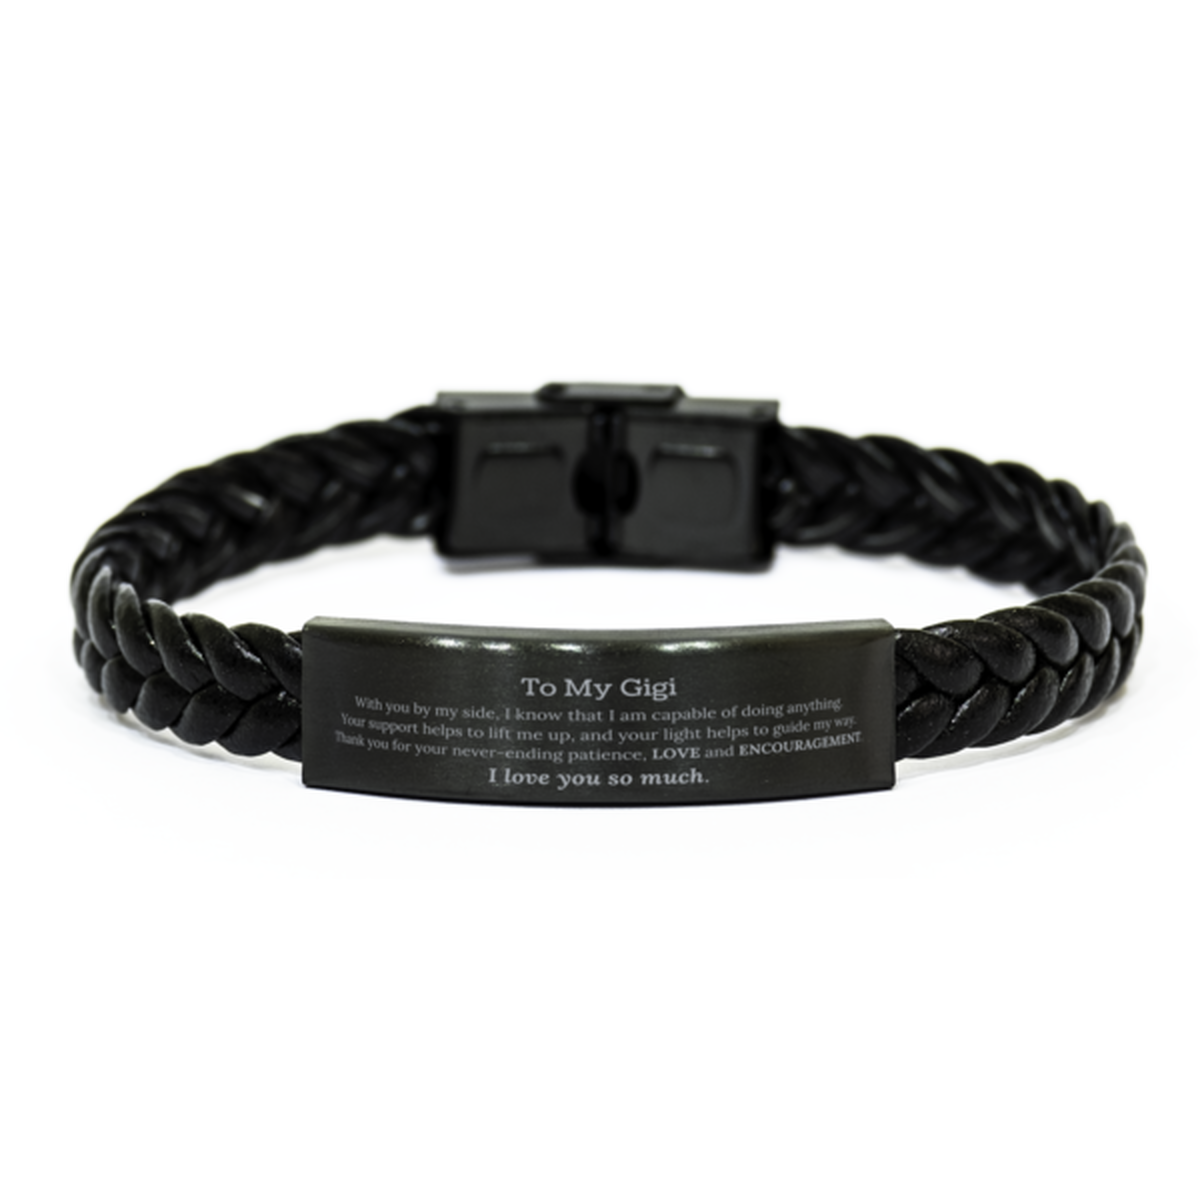 Appreciation Gigi Braided Leather Bracelet Gifts, To My Gigi Birthday Christmas Wedding Keepsake Gifts for Gigi With you by my side, I know that I am capable of doing anything. I love you so much